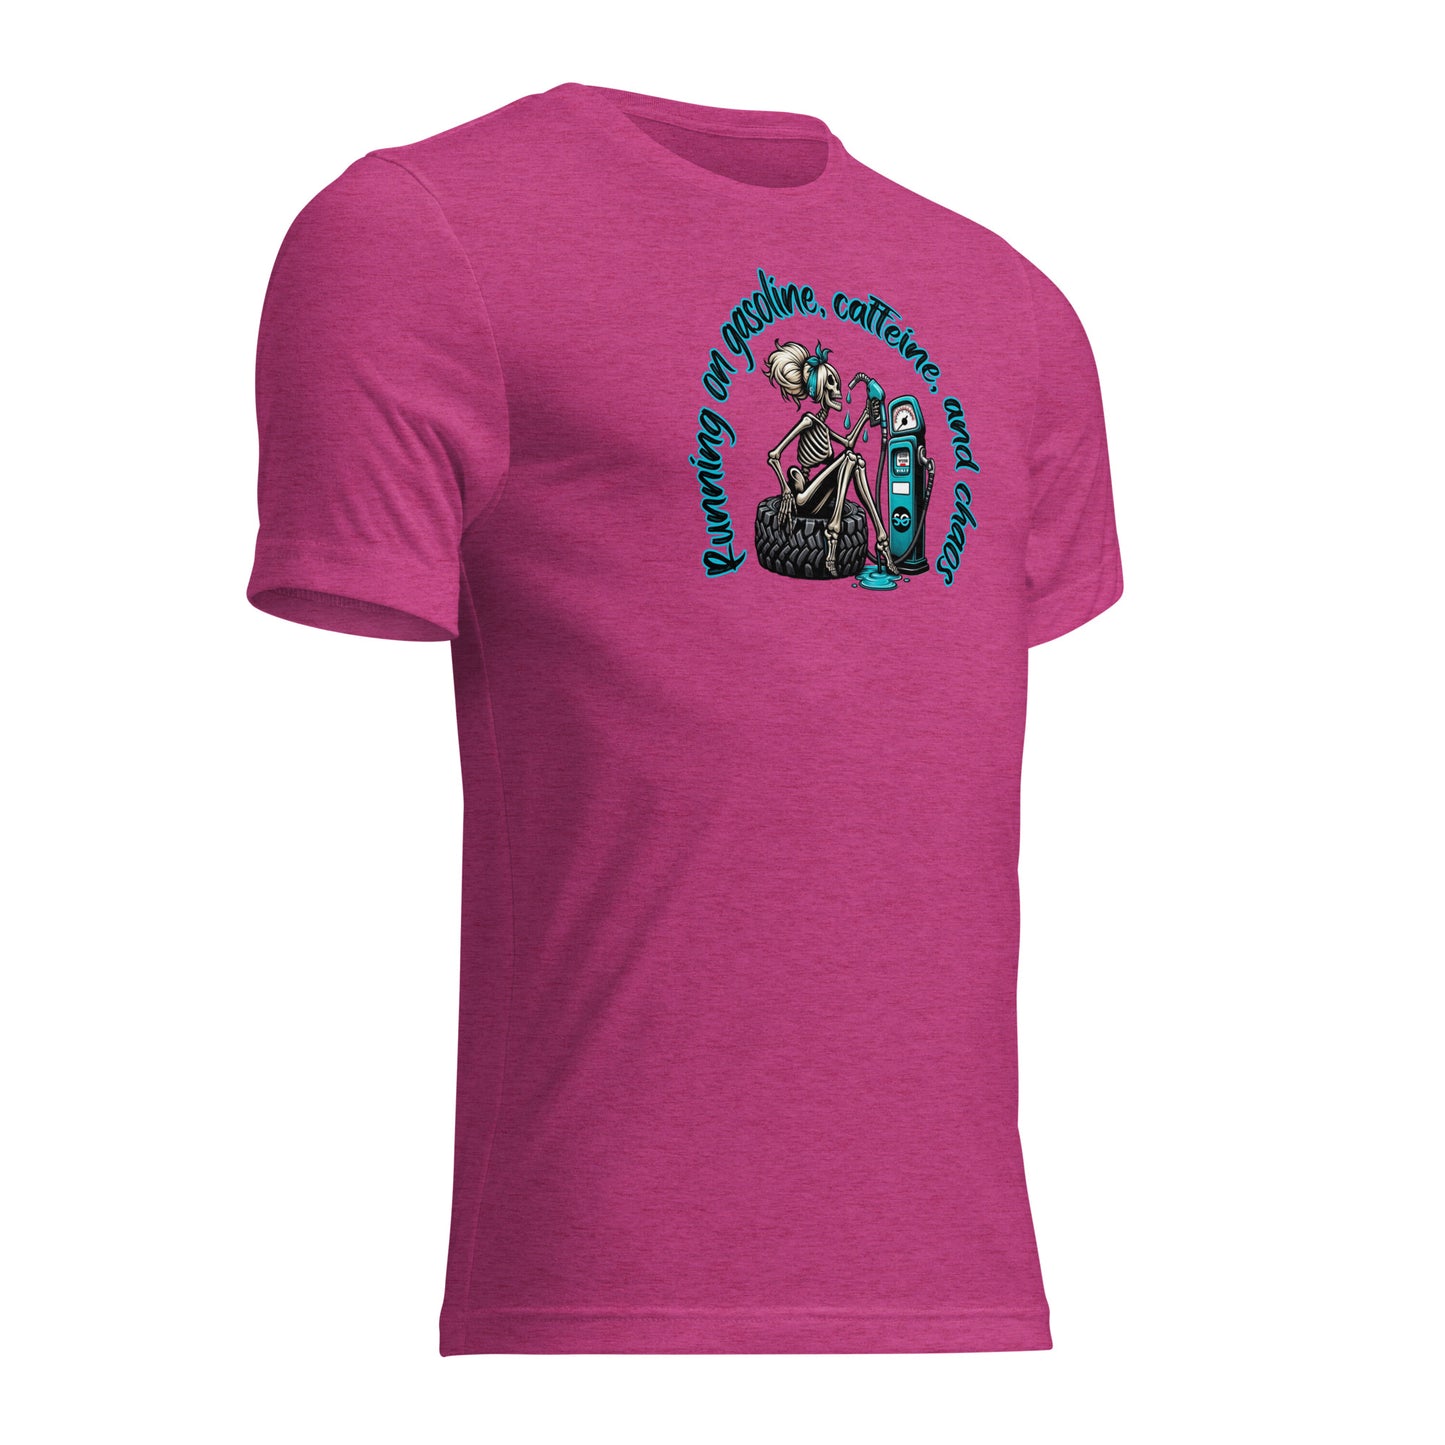 a pink t - shirt with an image of a woman in a dress